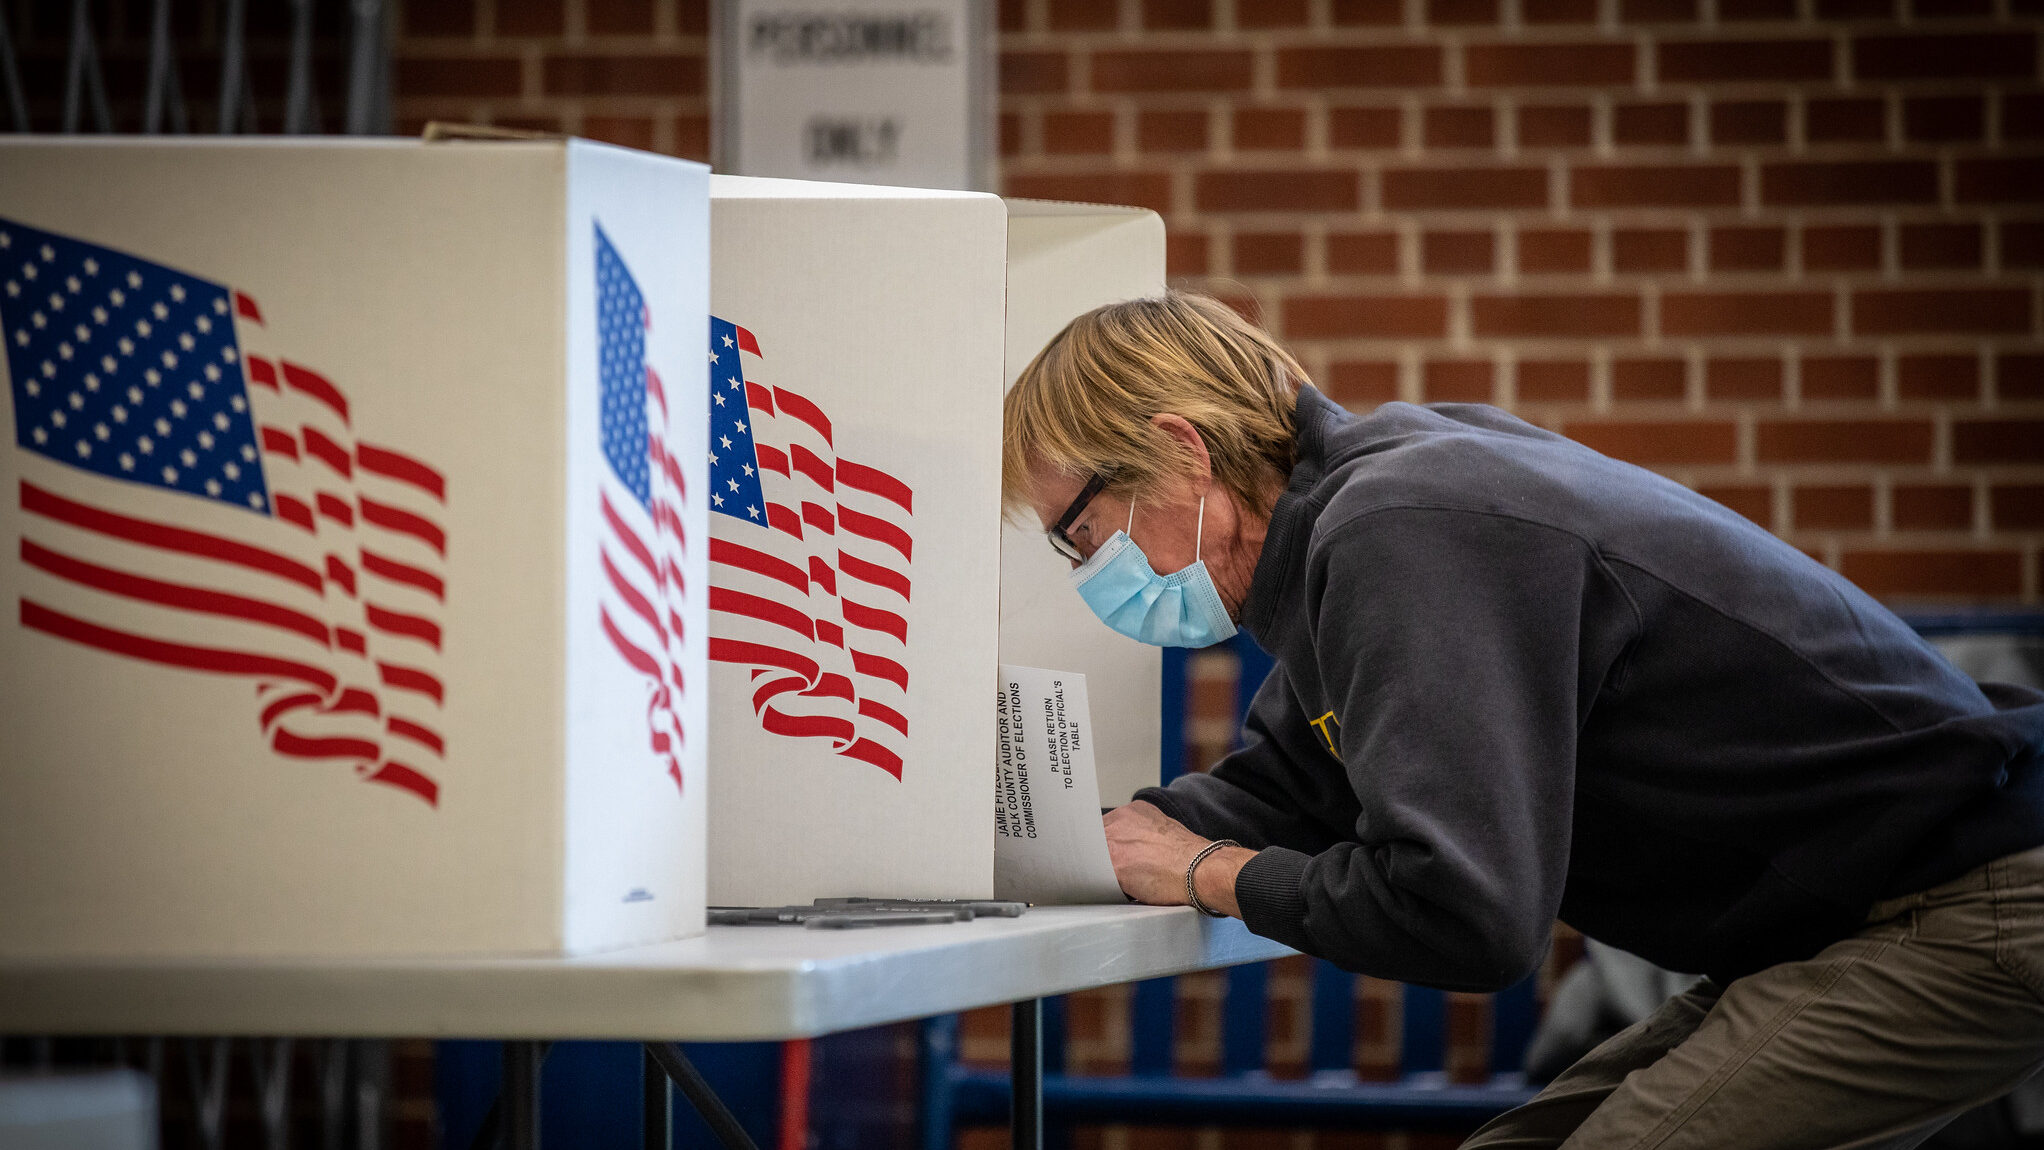 Filing alleges PA State Dept. advised voters to submit ‘cured’ ballots, violating county rules